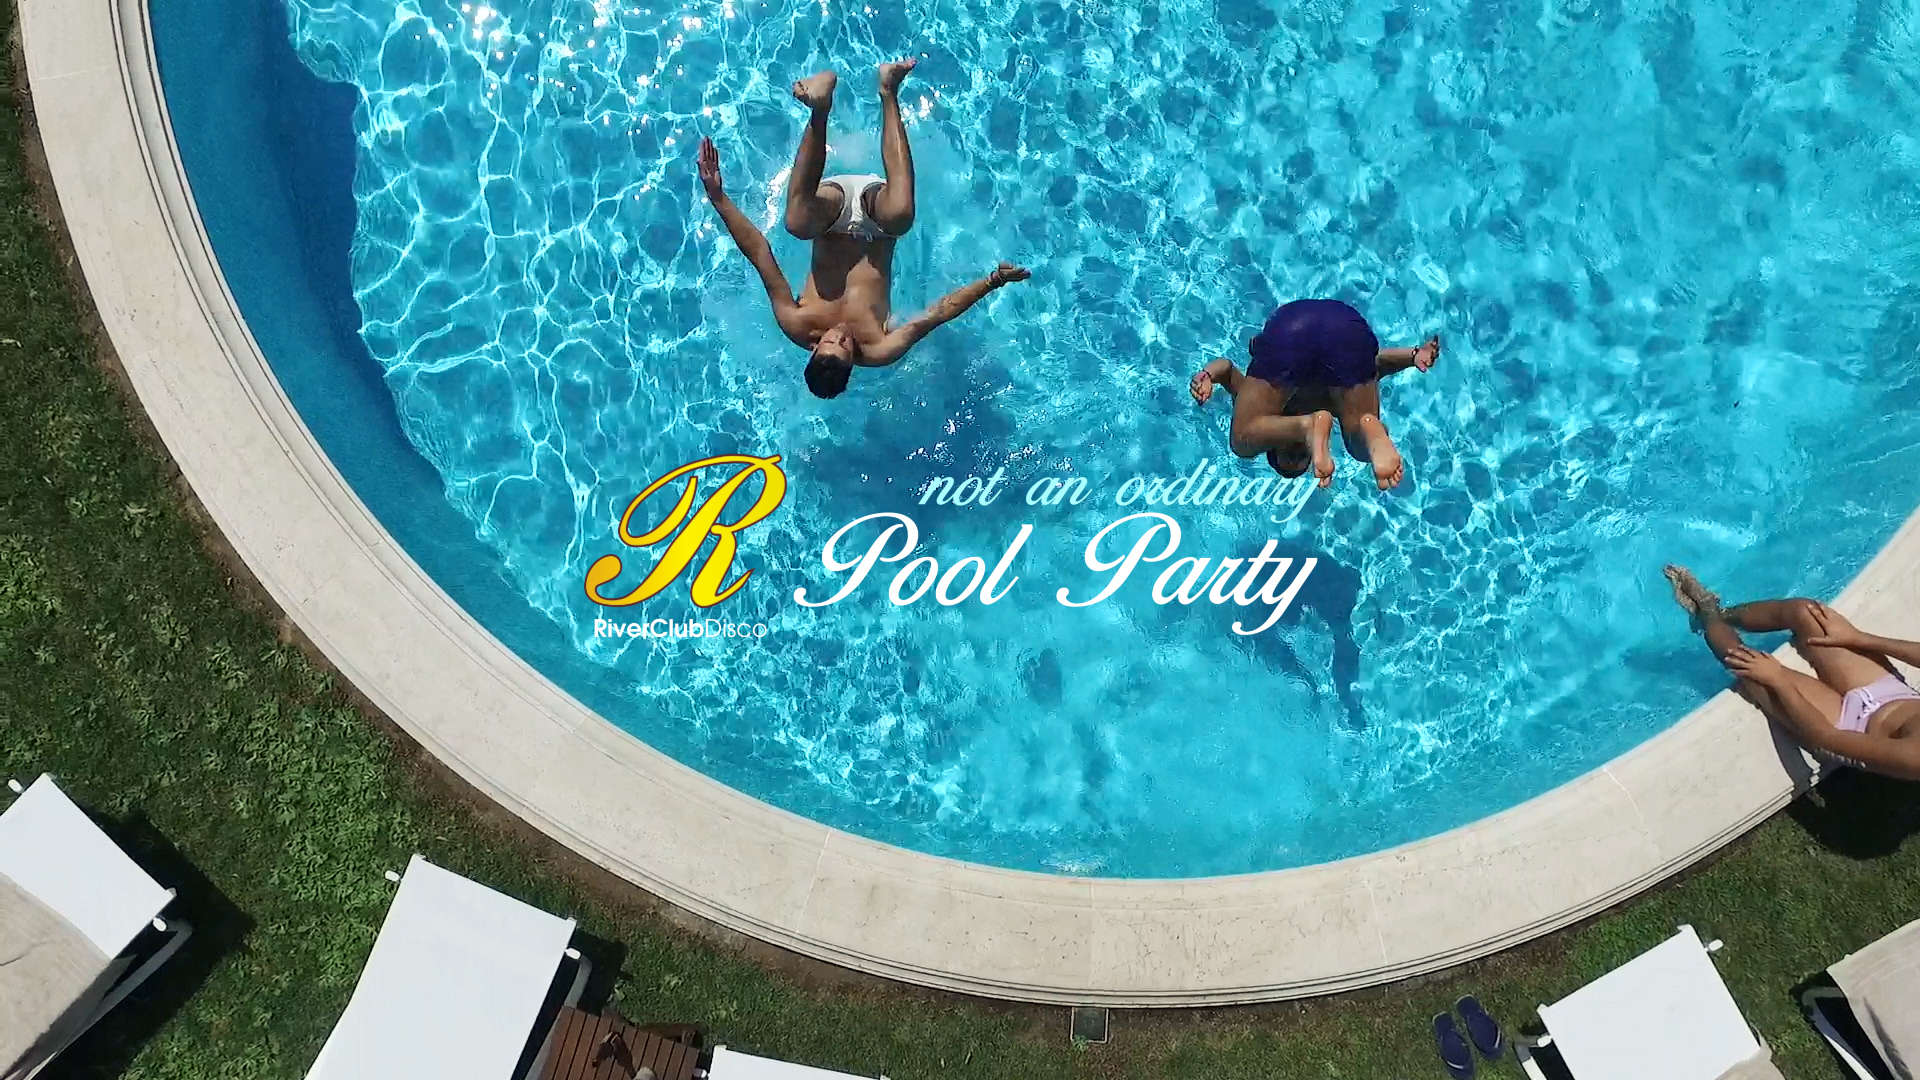 Pool Party Images Hd - HD Wallpaper 